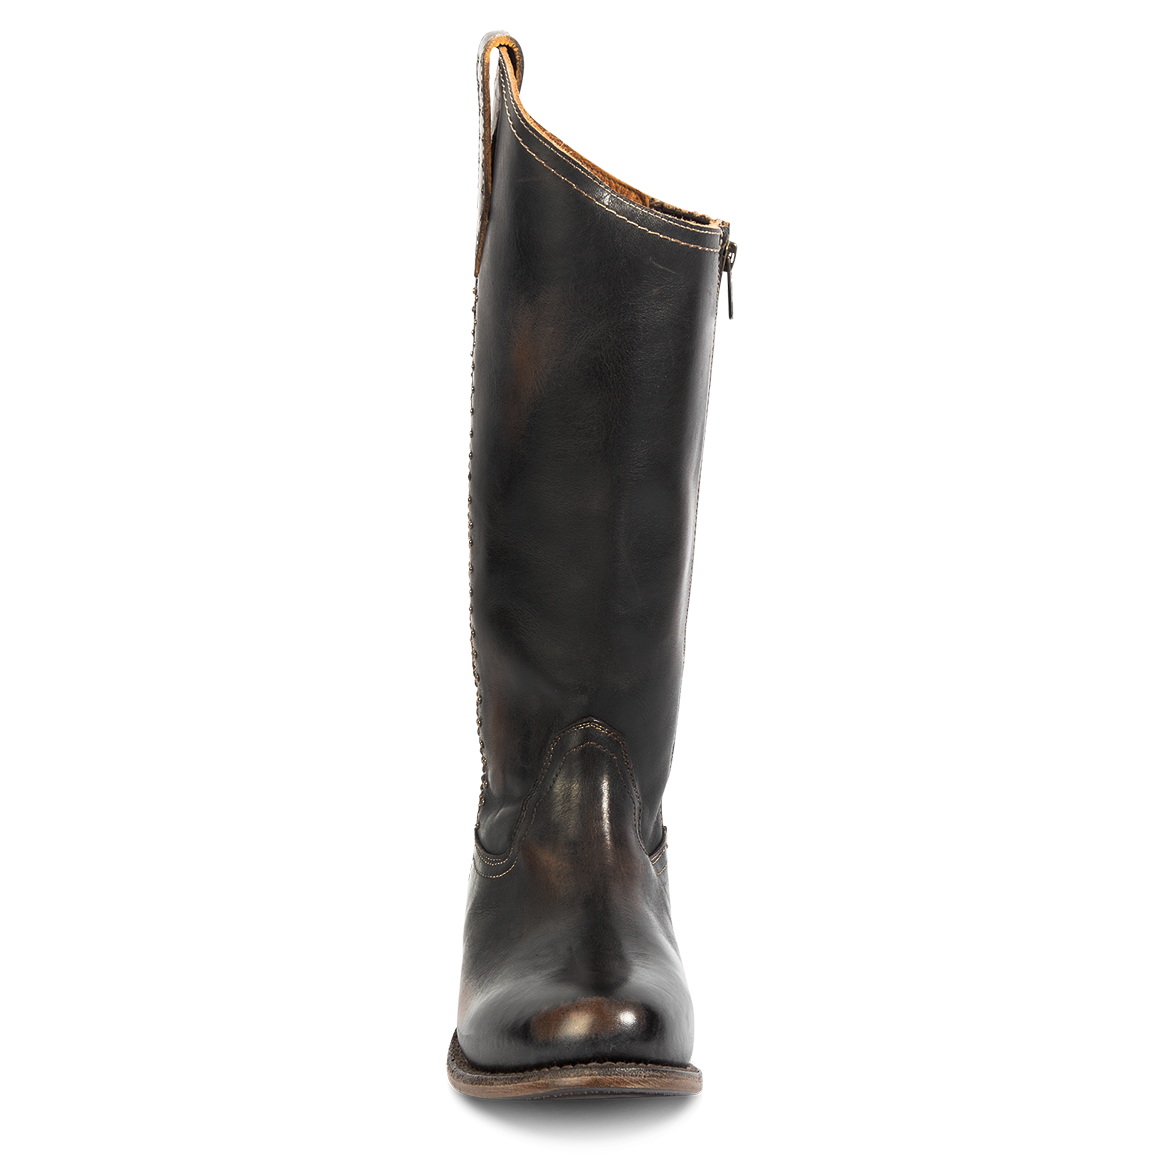 Front viewing showing high to low shaft construction on FREEBIRD women's Rigger black leather boot